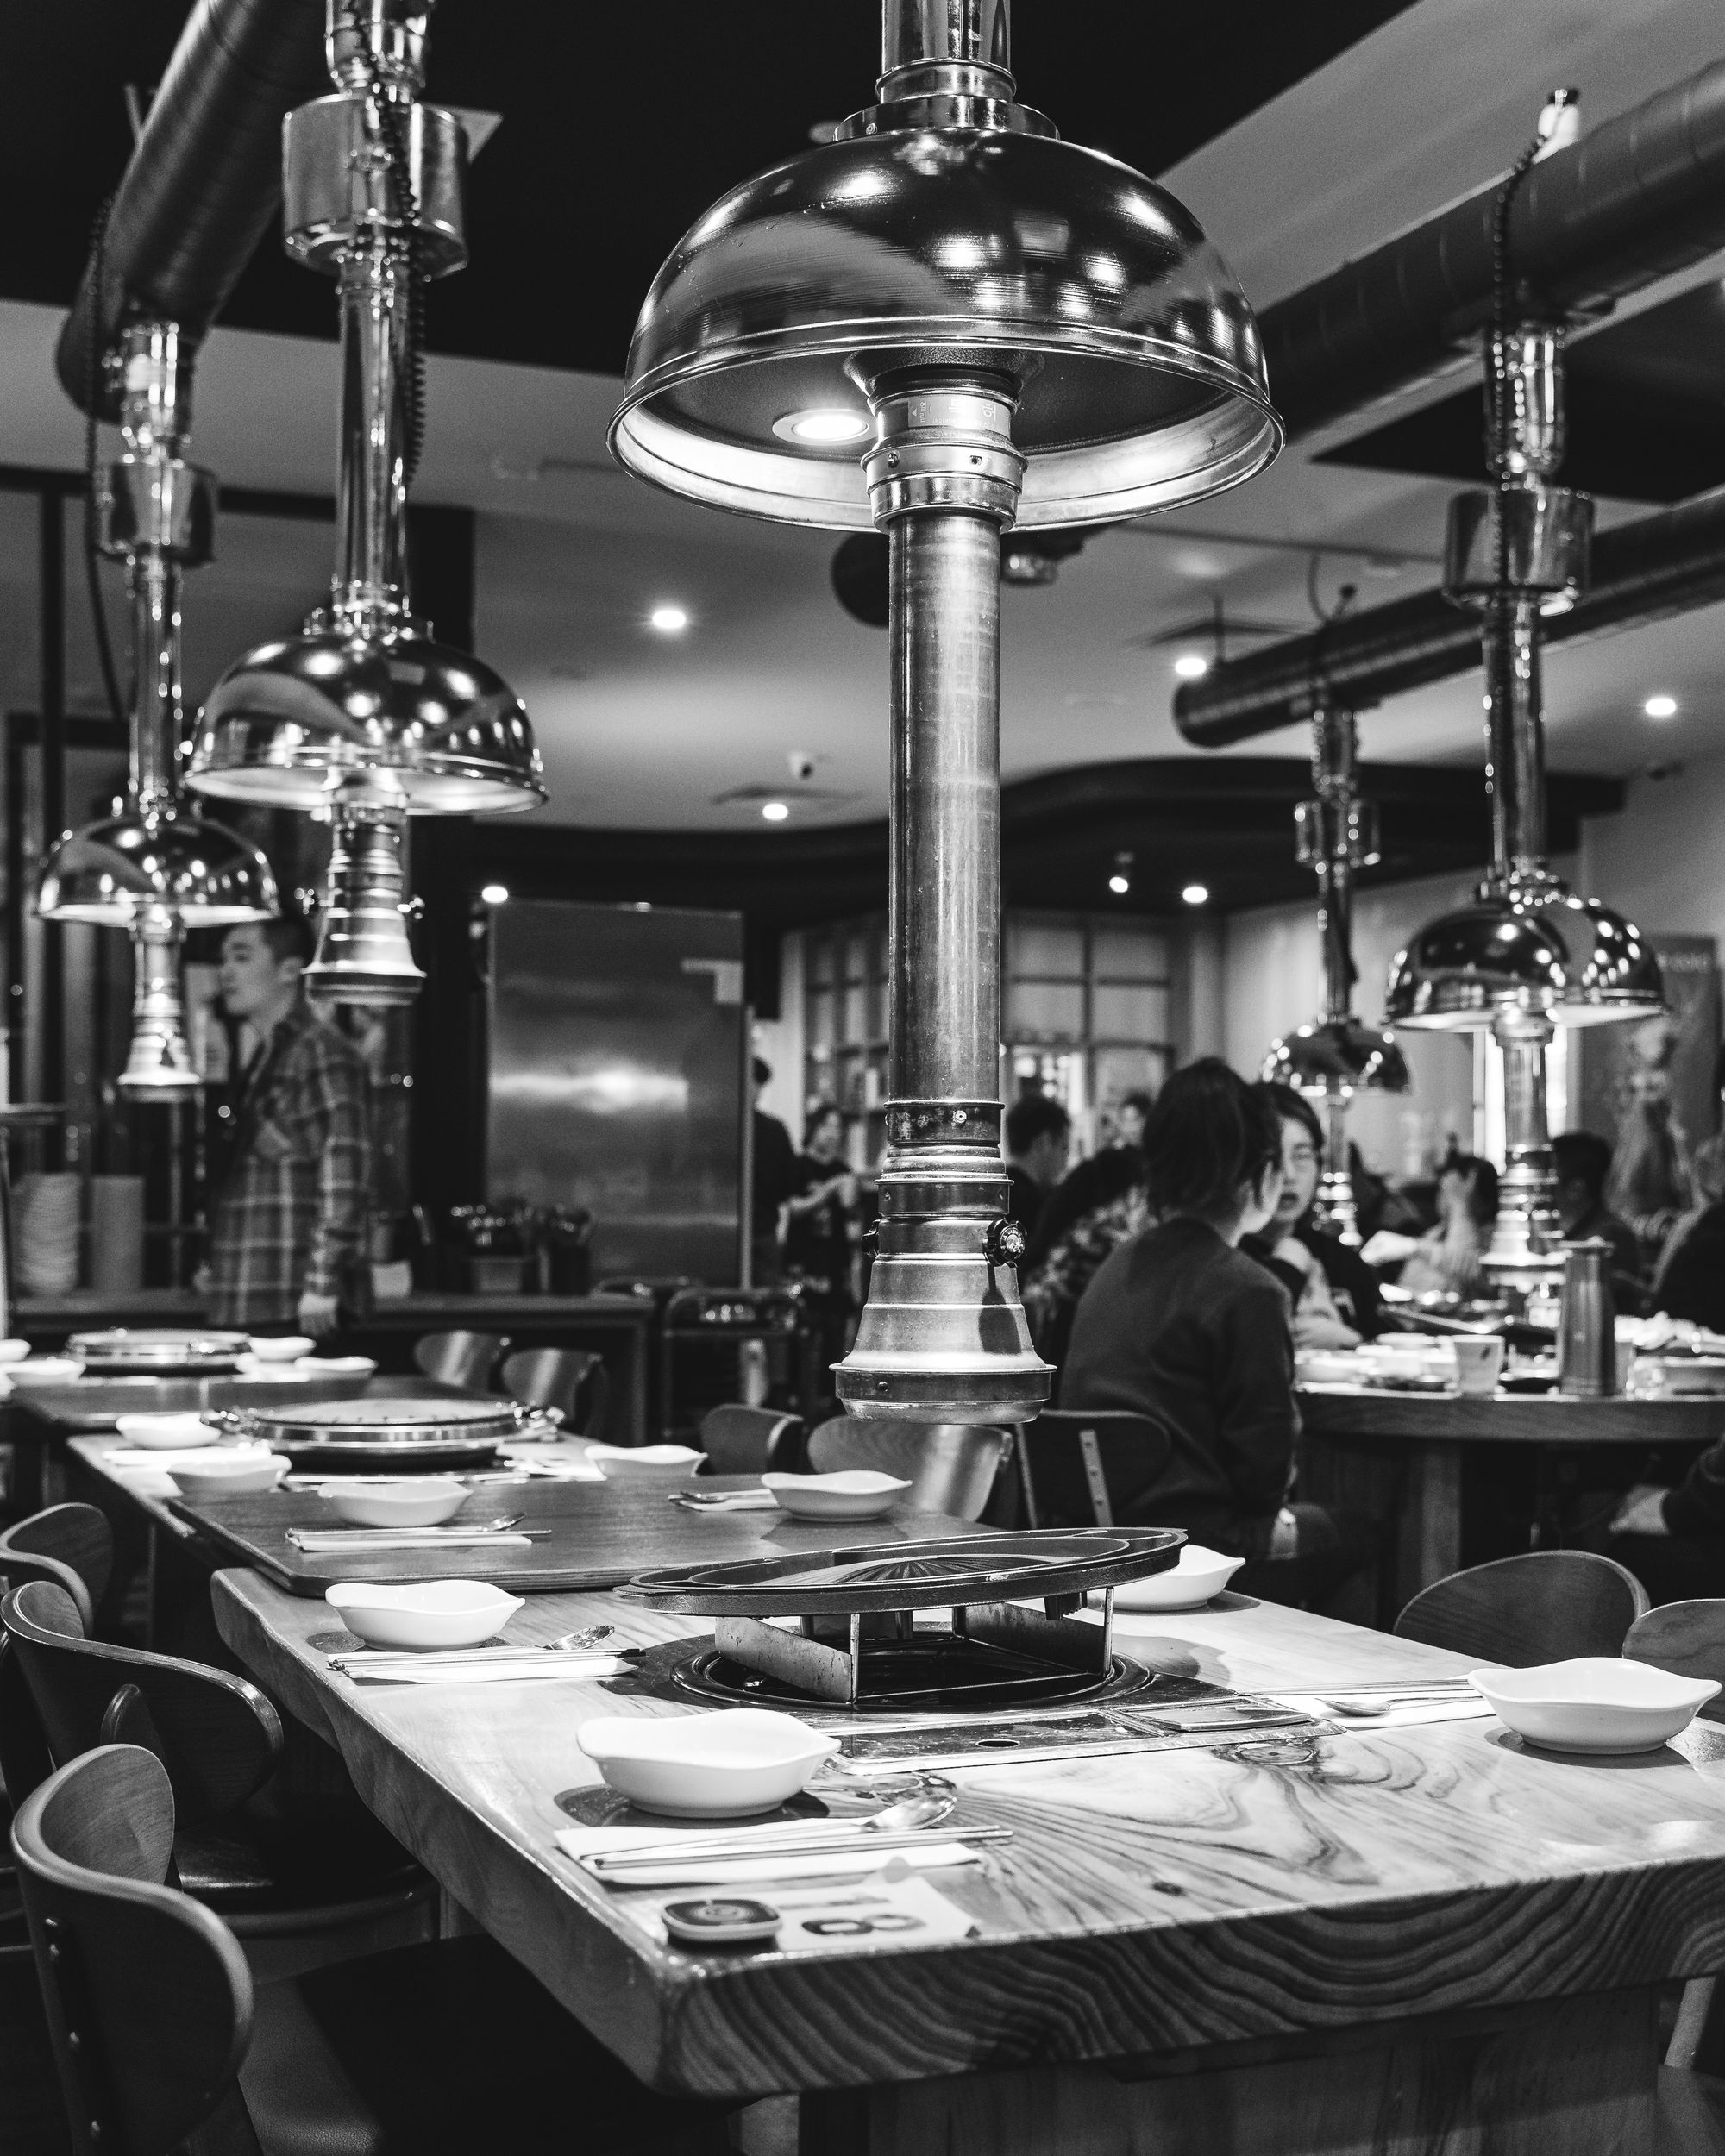 Black and white photo of Korean BBQ restaurant interior, with exhaust fans